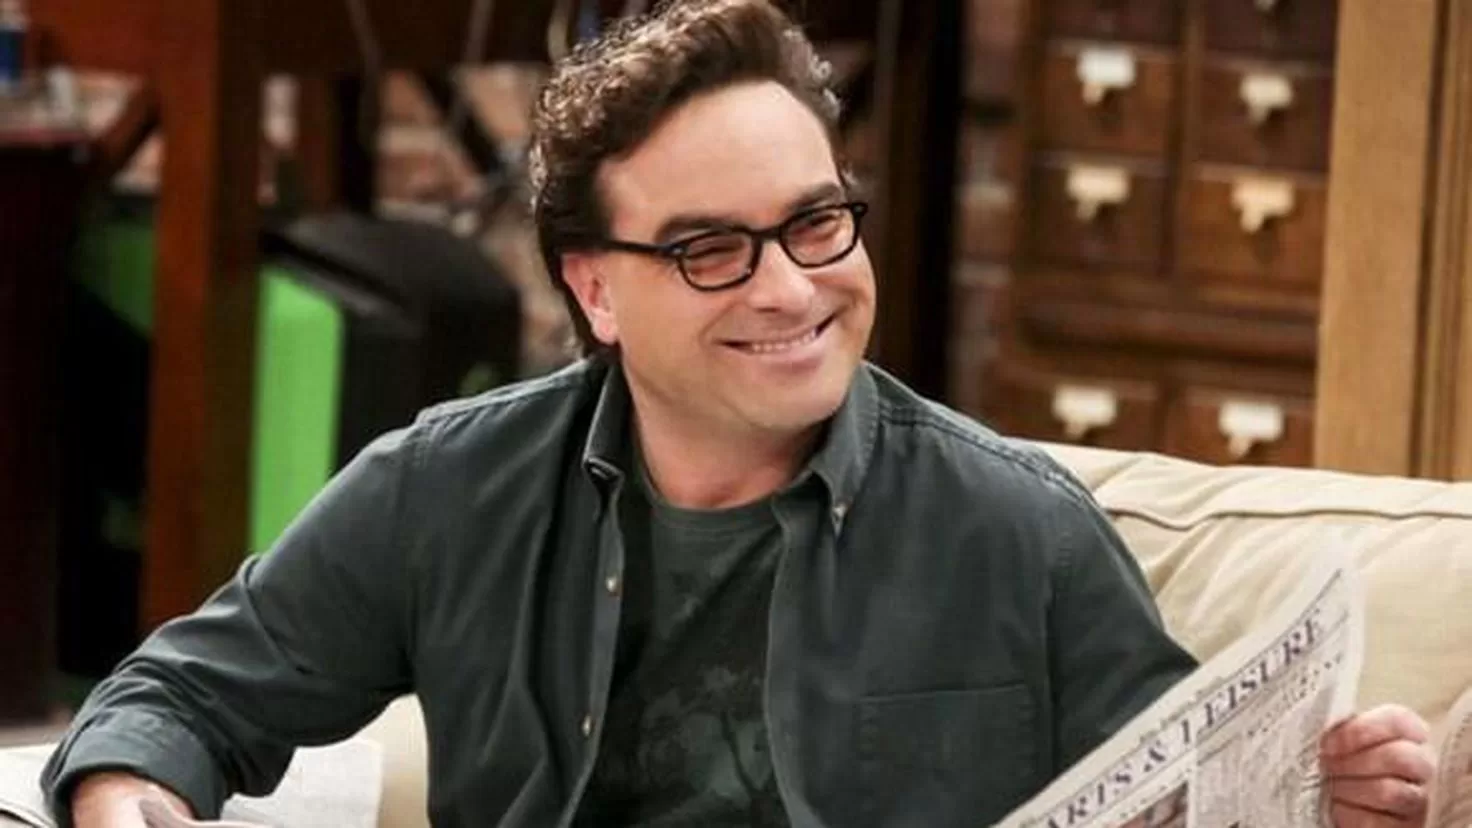 The Big Bang Theory's Johnny Galecki secretly gets married
